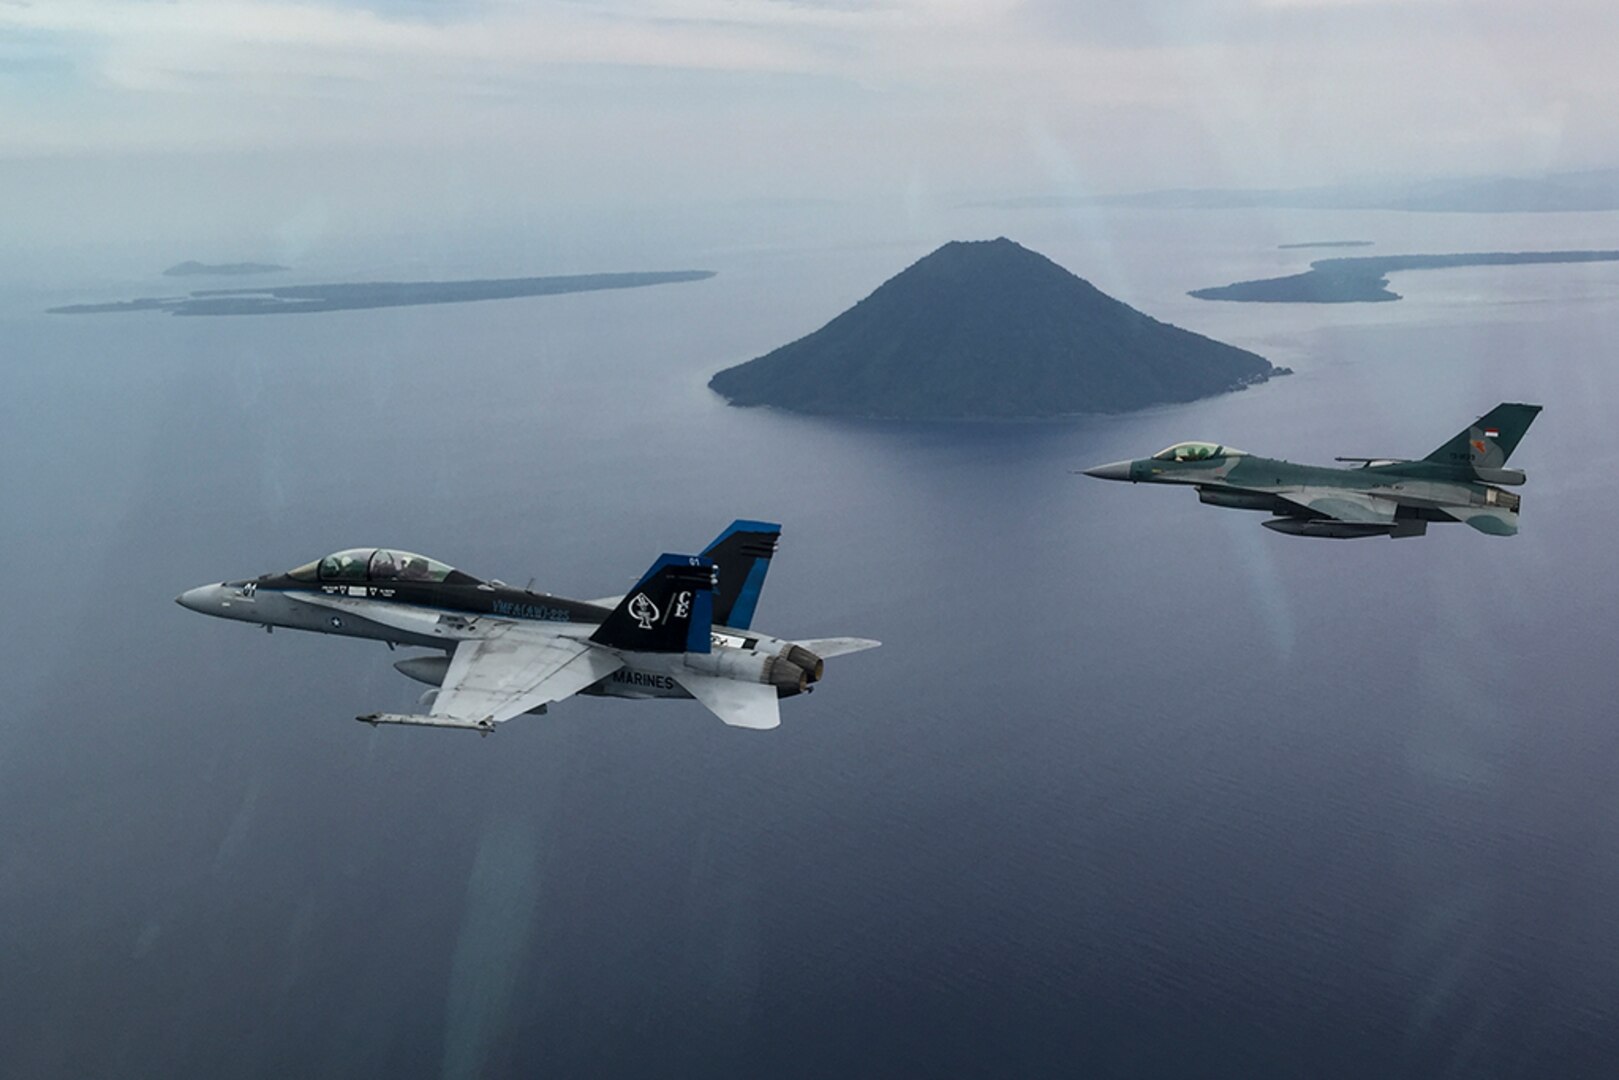 A U.S. Marine Corps F/A-18D Hornet with Marine All-Weather Fighter Attack Squadron (VMFA (AW)) 225 and an Indonesian Air Force F-16 Fighting Falcon fly in formation during exercise Cope West 17 in Indonesia, Nov. 4, 2016. The combined training offered by this exercise helps prepare the U.S. Marine Corps and Indonesia Air Force to work together in promoting a peaceful Indo-Asia-Pacific region while practicing close air support and air-to-air training that will enhance their ability to respond to contingencies throughout the region. Both the U.S. F/A-18D Hornets and Indonesian F-16 Fighting Falcons bring unique capabilities affording the associated nations the opportunity to learn and understand each other’s skills, preparing them for real world contingencies and further strengthening their relationship. 